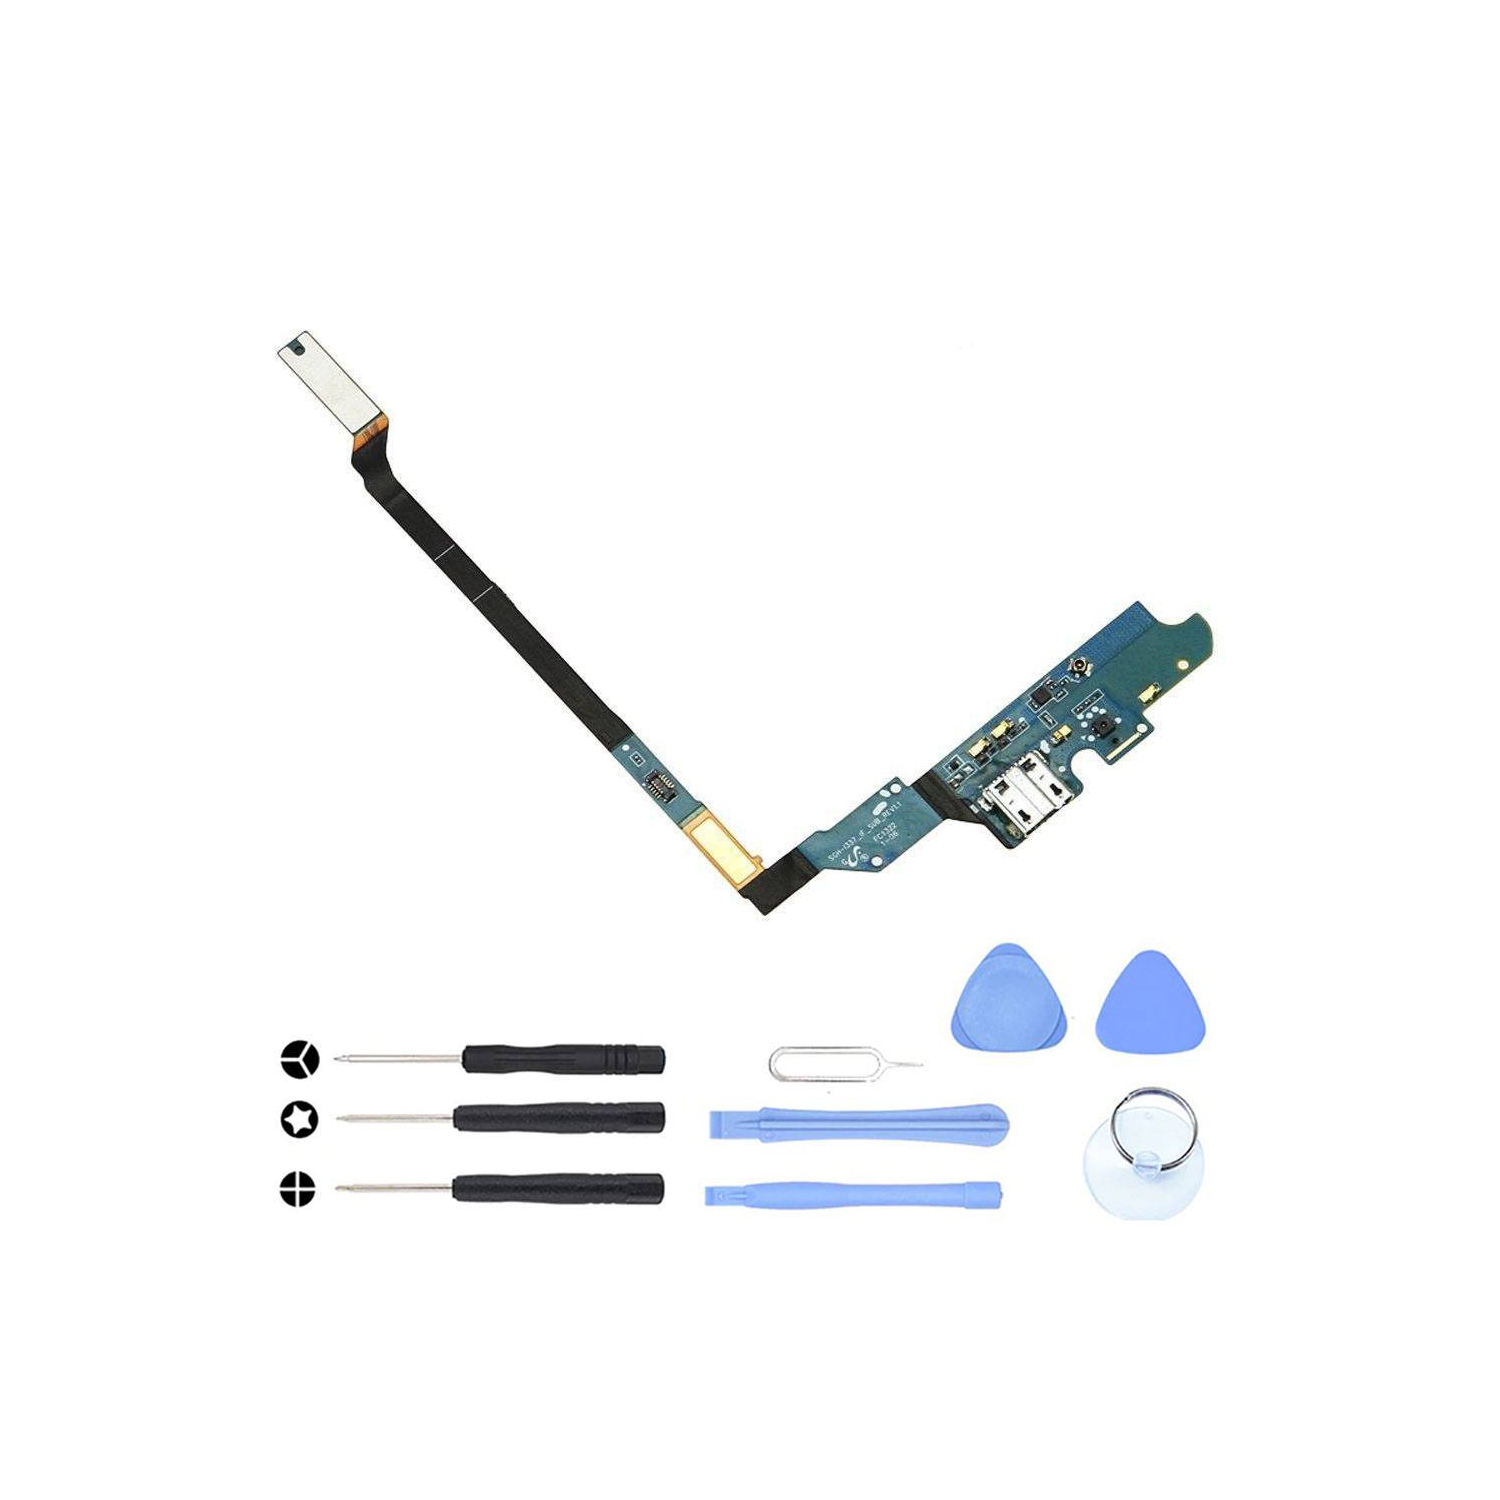 Charging port flex cable and microphone for Samsung Galaxy S4 SGH-I337M SGH-I337